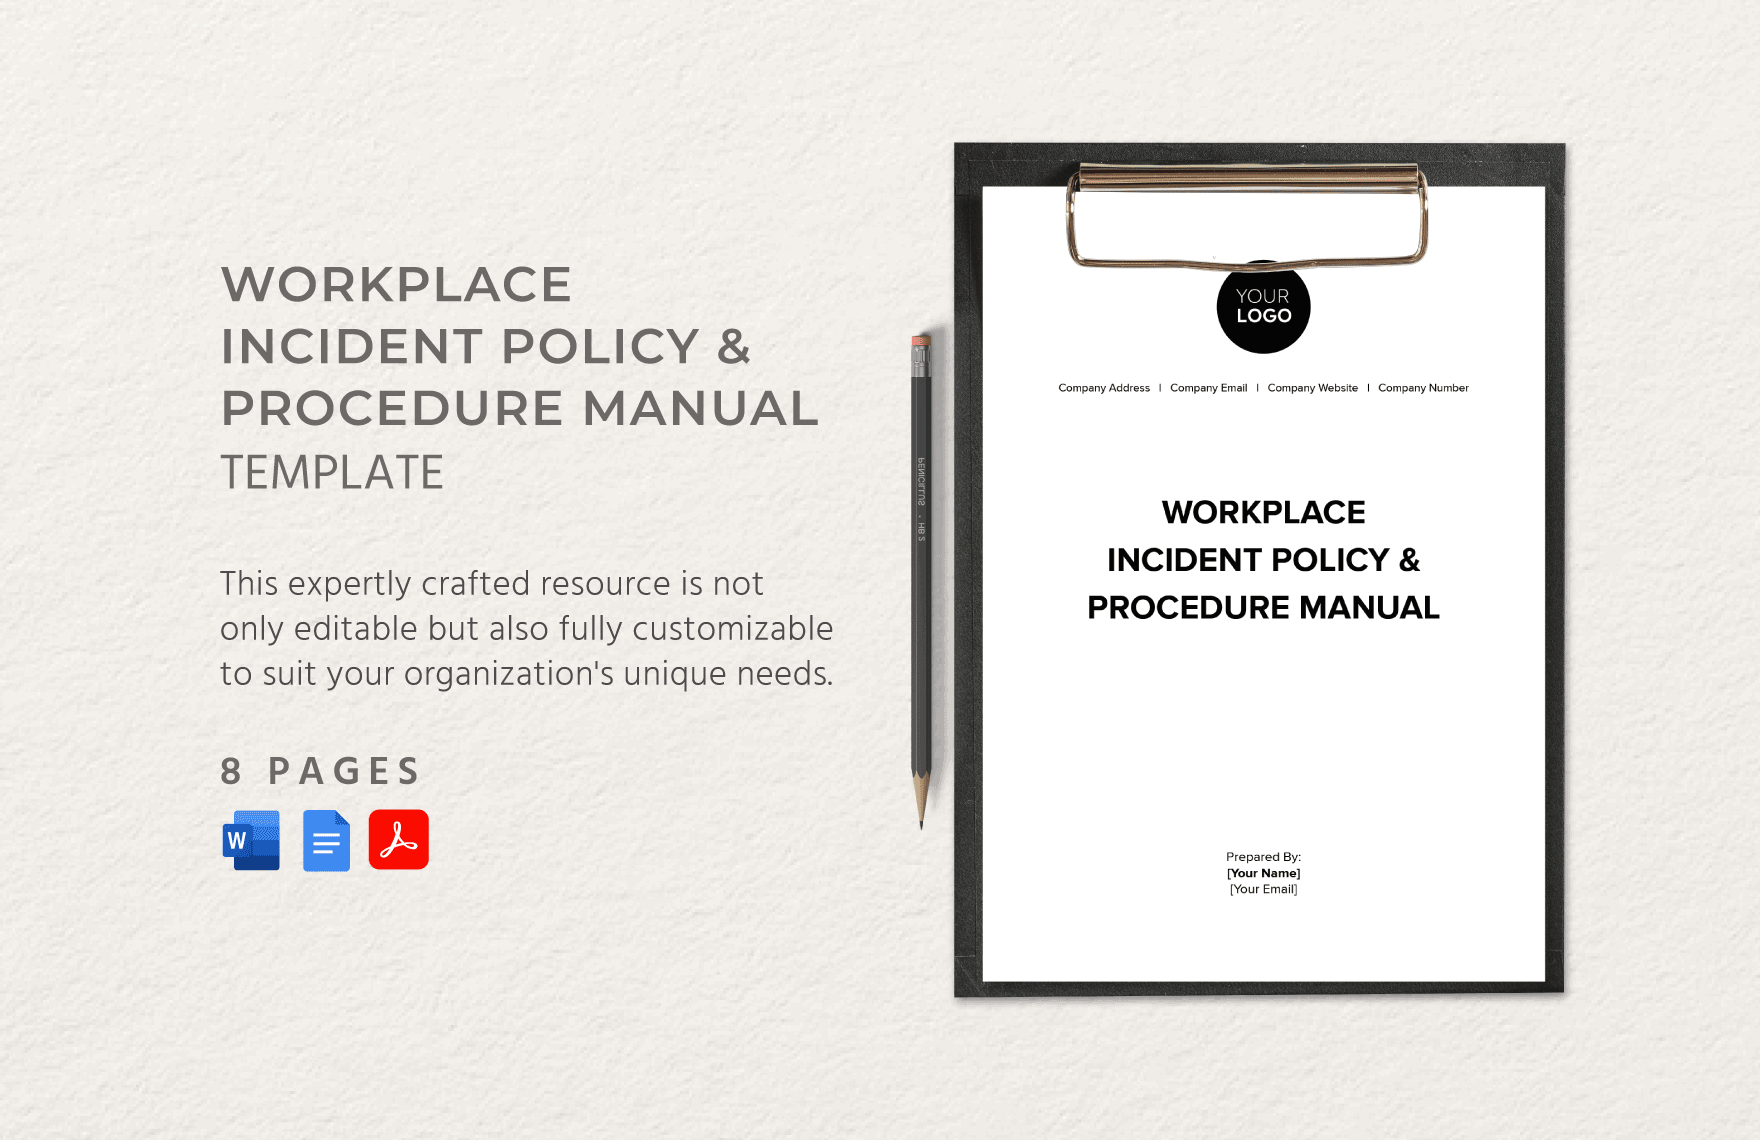 Workplace Incident Policy & Procedure Manual Template in Word, Google Docs, PDF